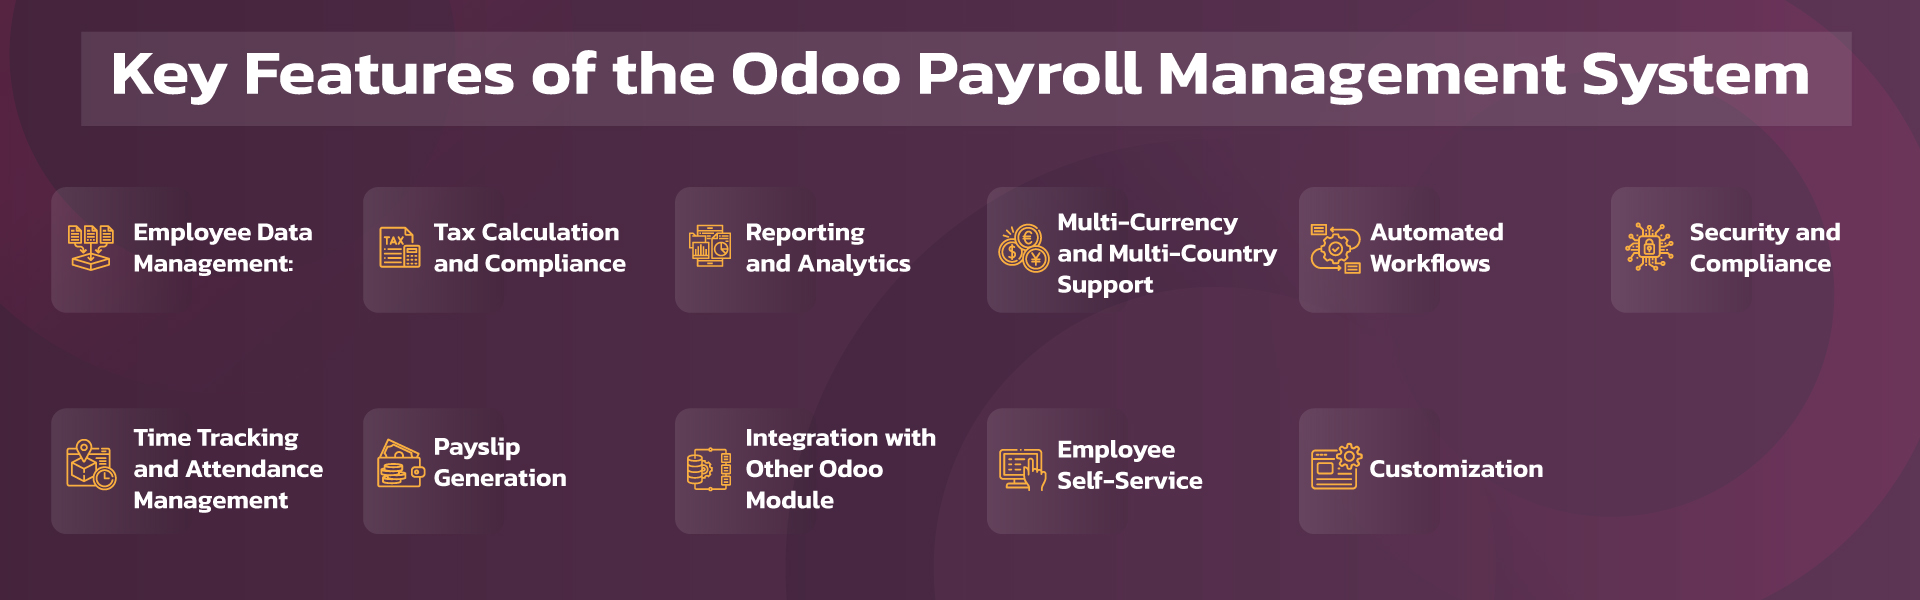 Key Features of the Odoo Payroll Management System